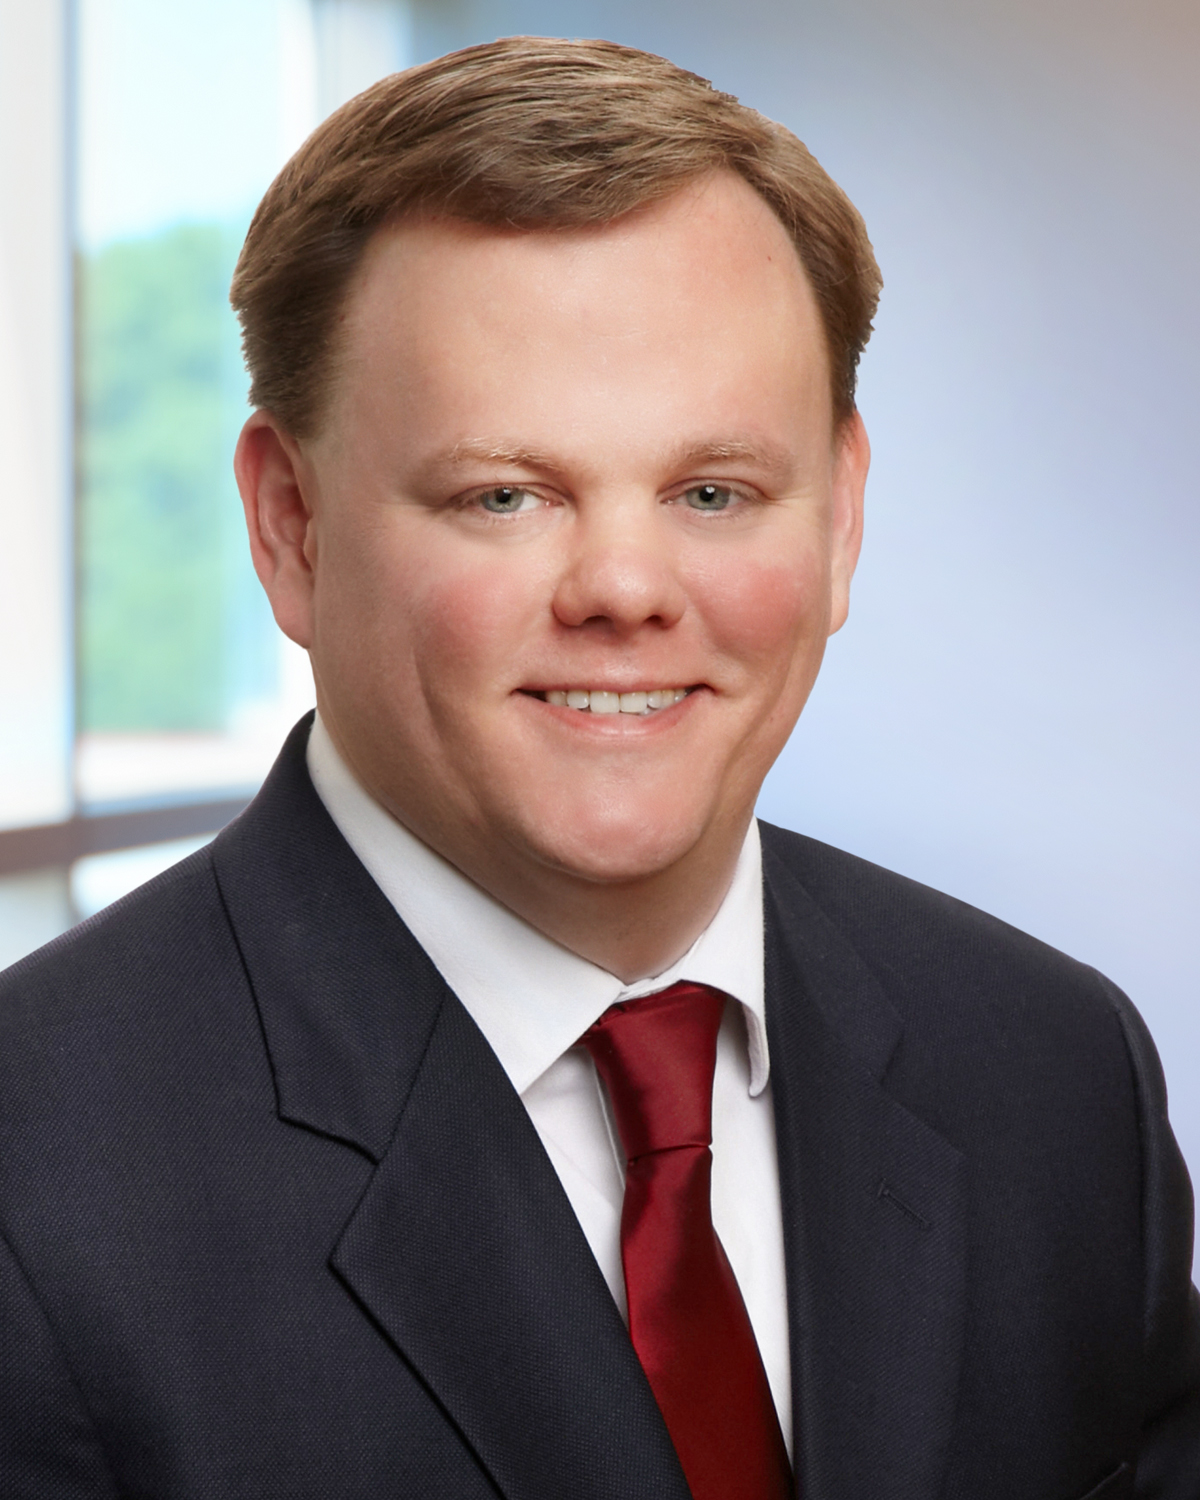 Workers Compensation Attorney Ryan Courtney of Fitch Johnson Larson